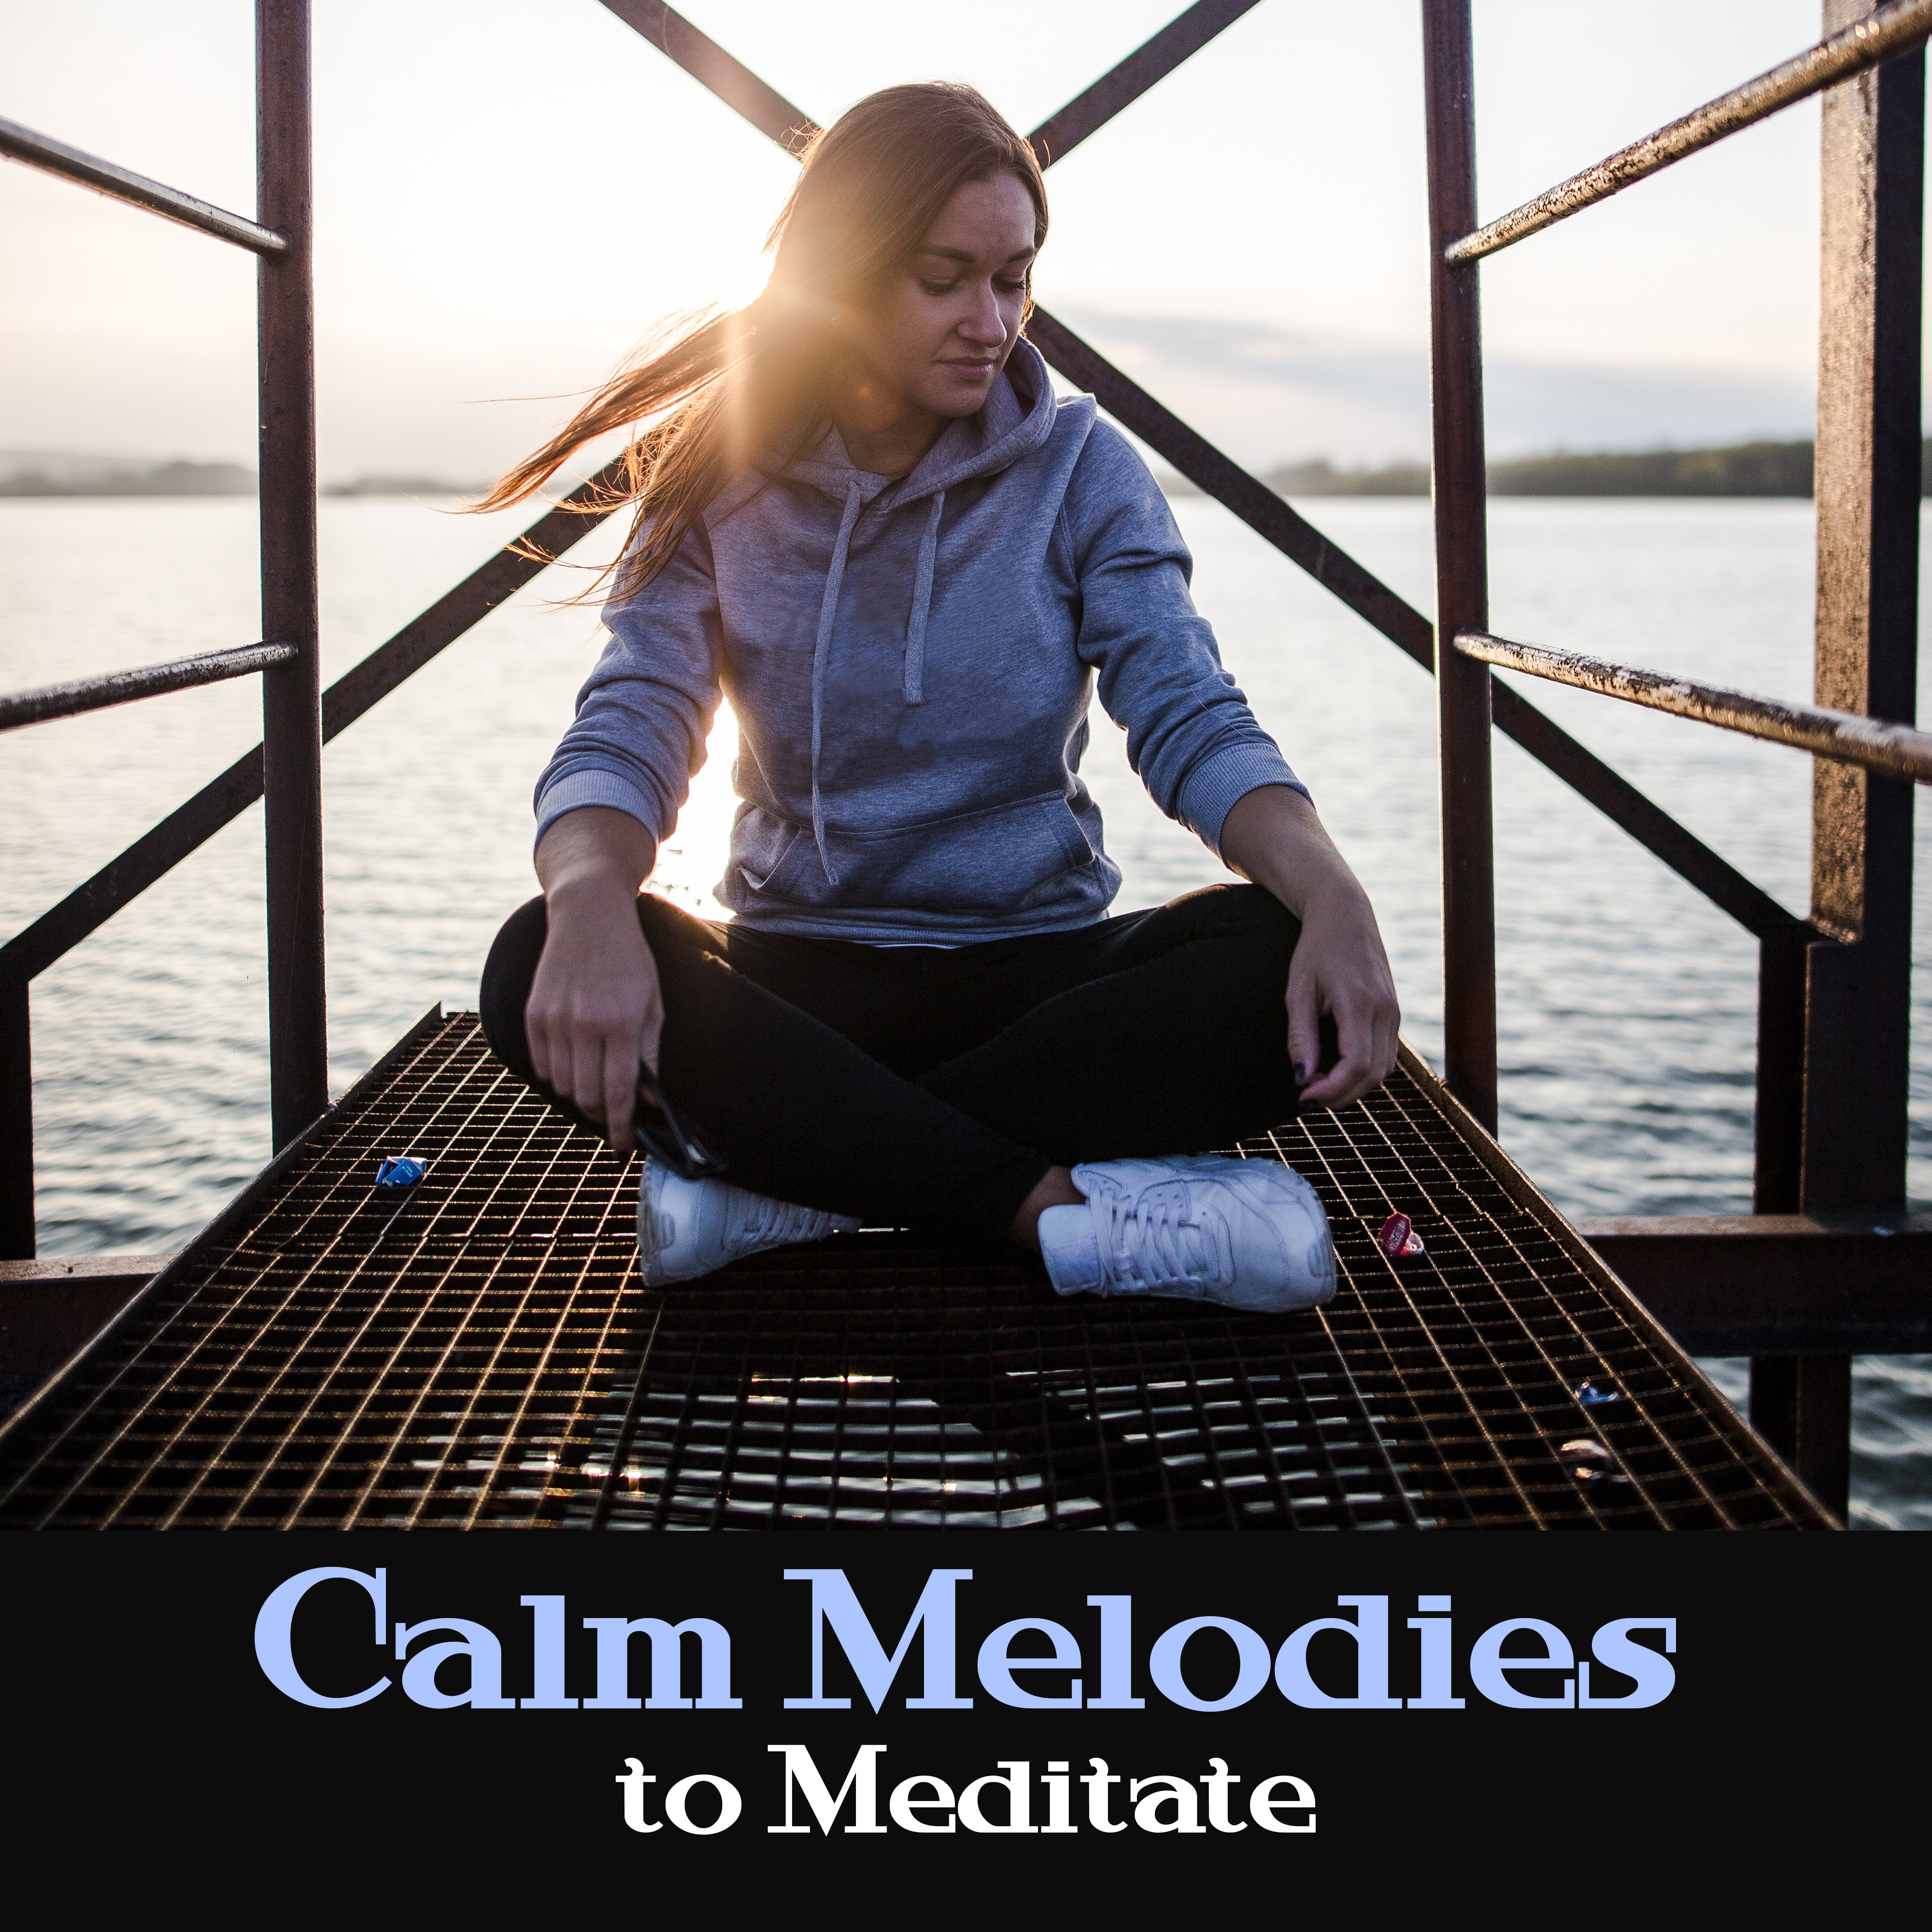 Calm Melodies to Meditate – Soft Music to Relax, Healing Therapy, Rest a Bit, Meditation Lounge, Buddha Music